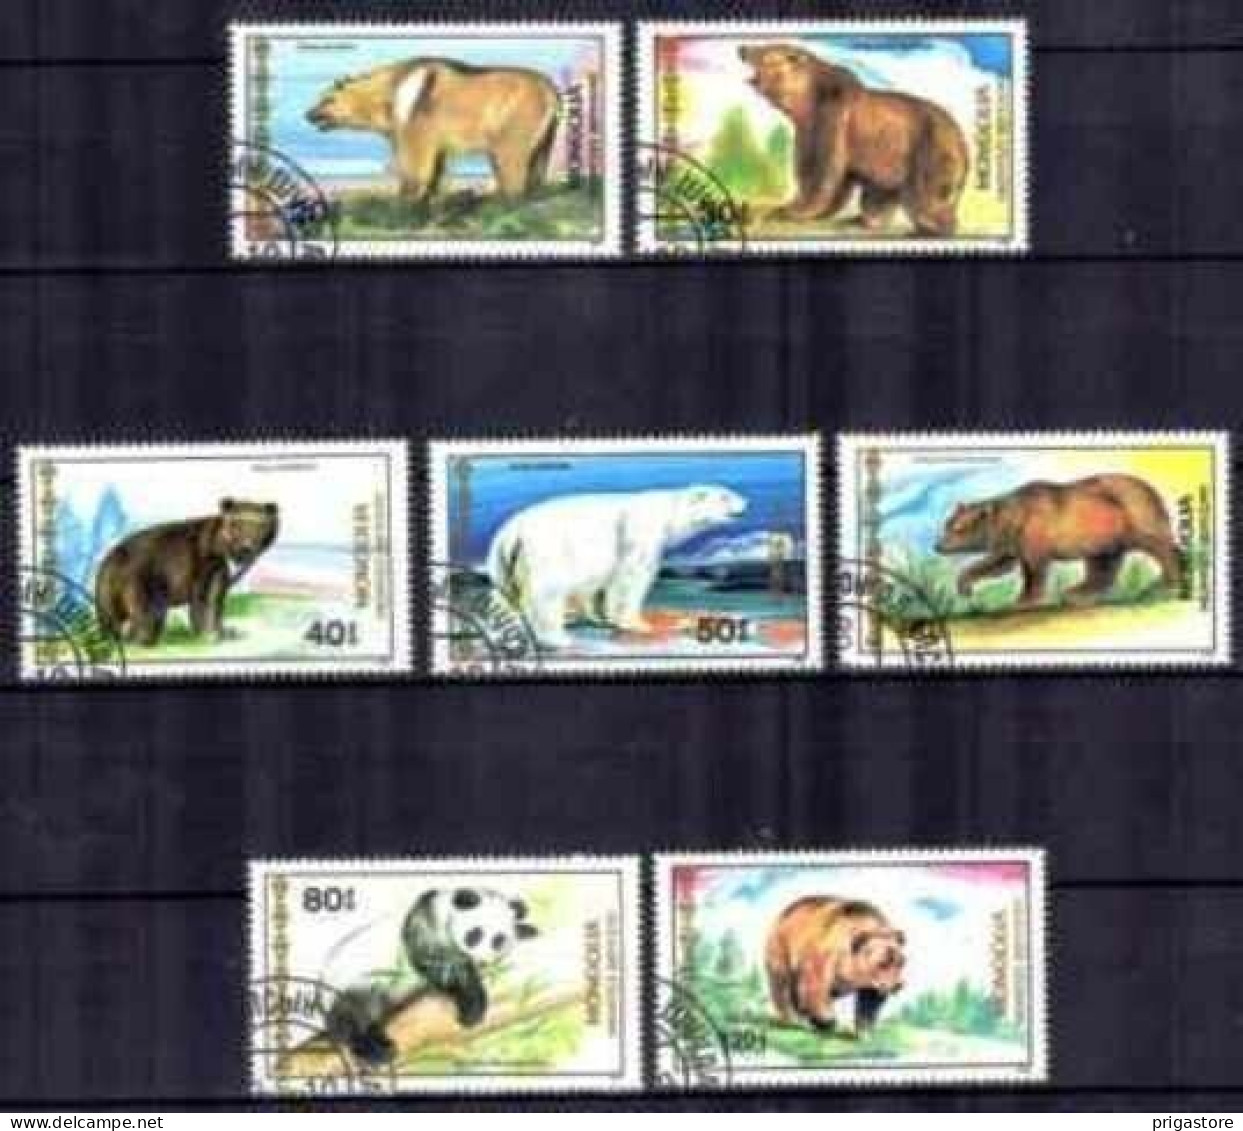 Animaux Ours Mongolie 1989 (108) Yvert N° 1650 à 1656 Oblitéré Used - Orsi